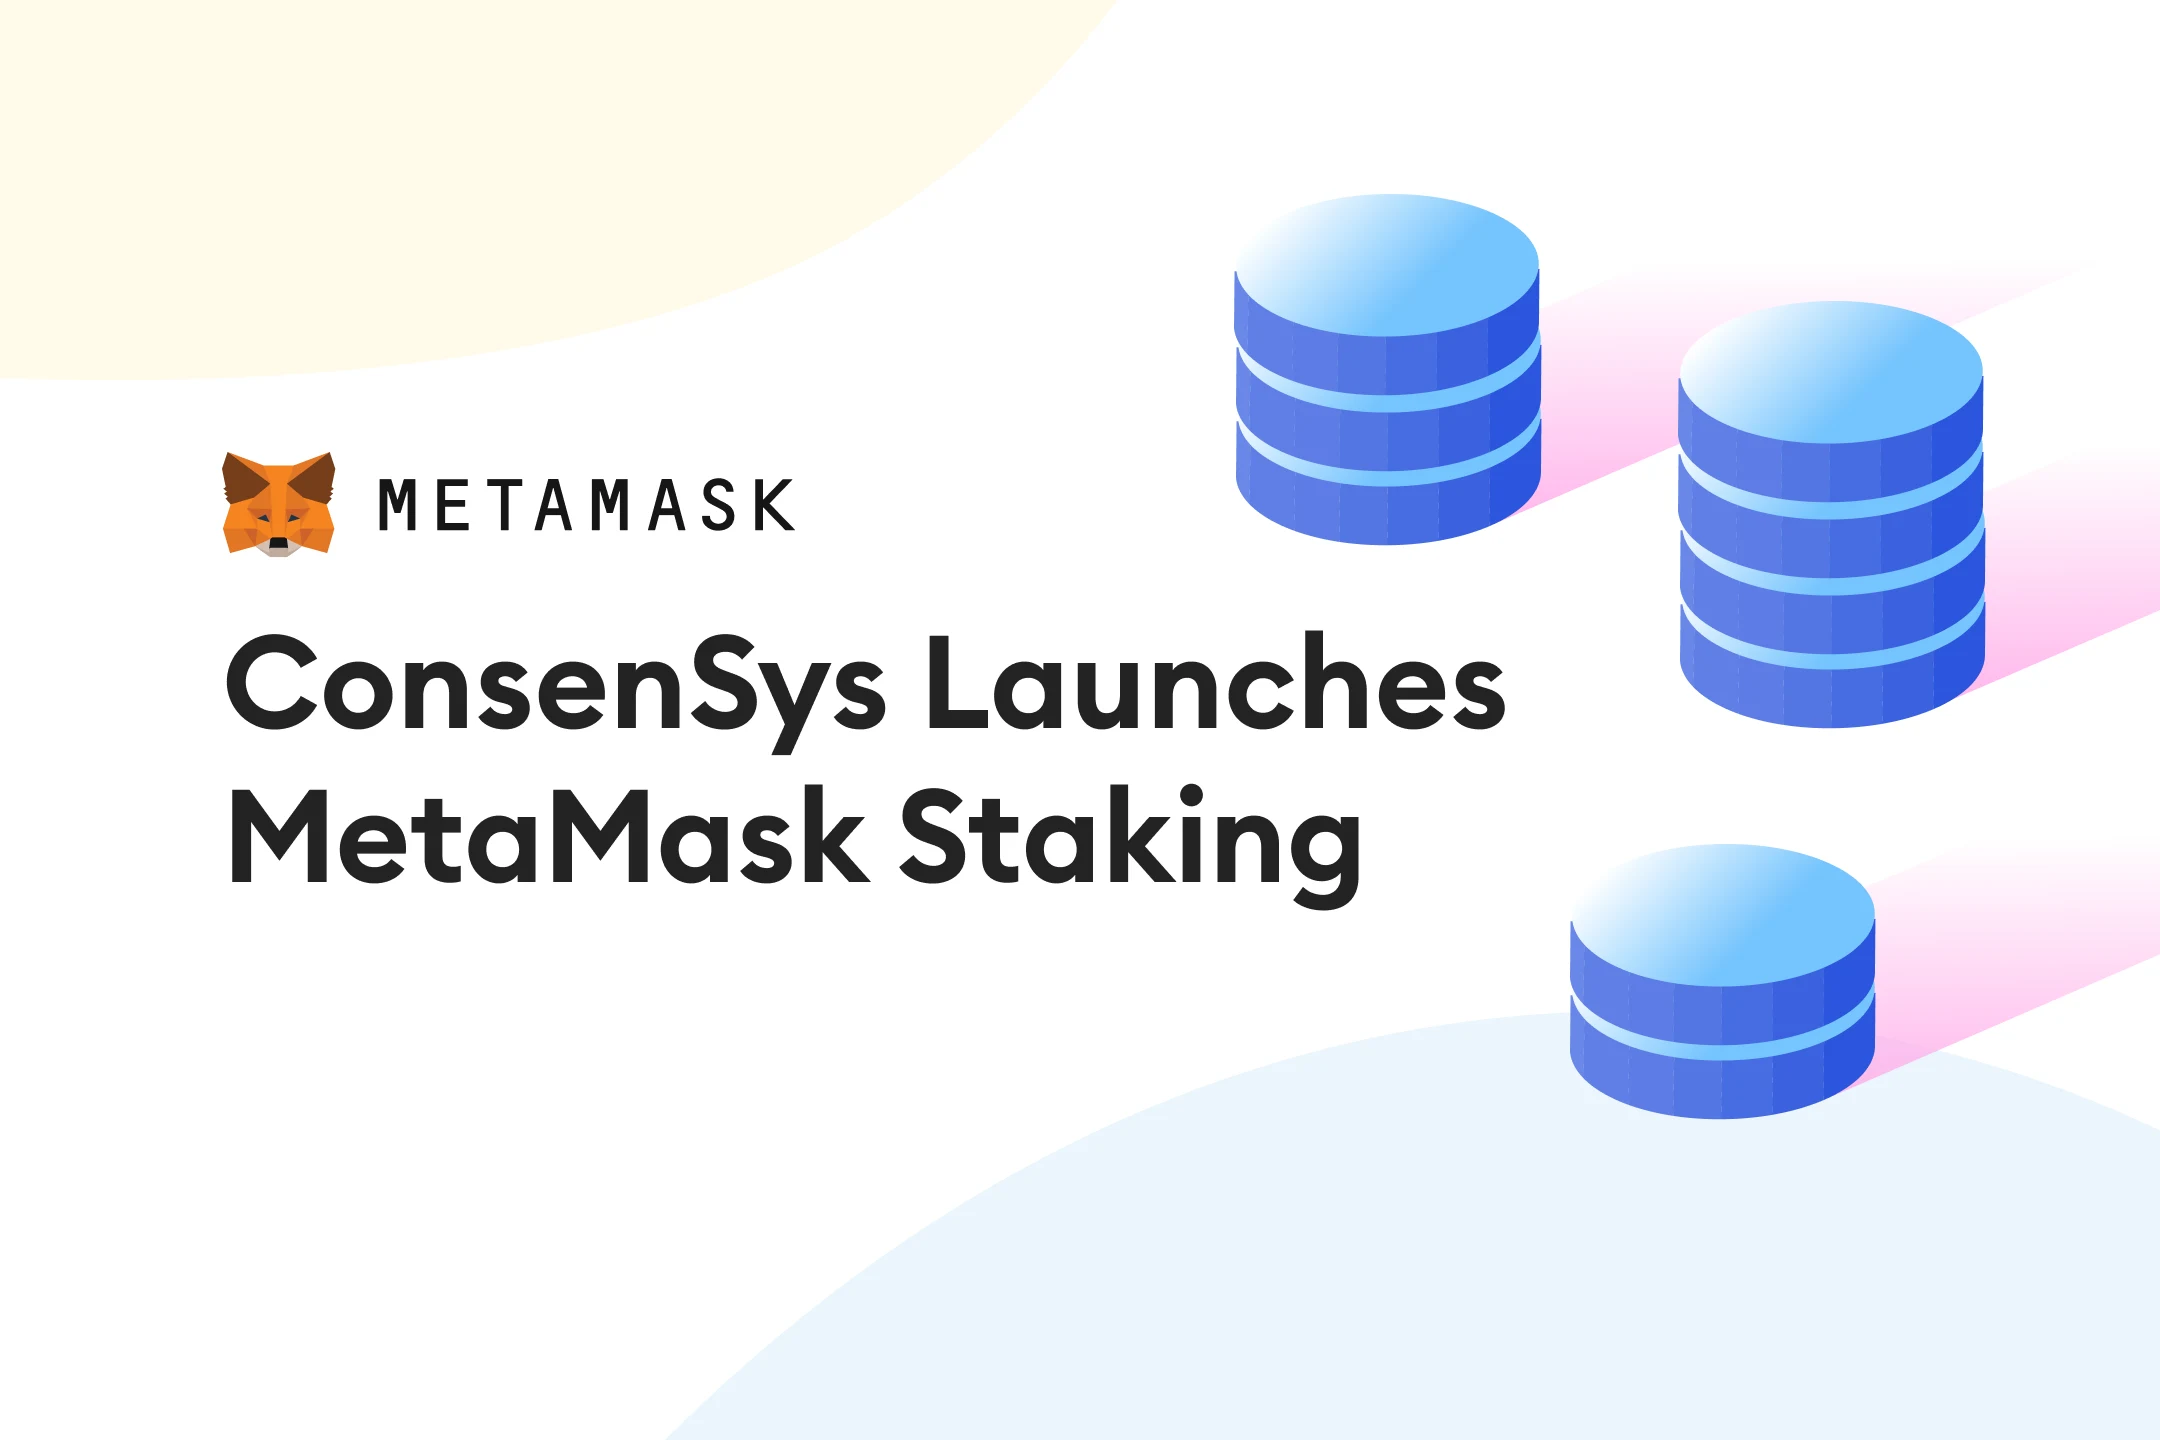 Image: Consensys Launches MetaMask Staking